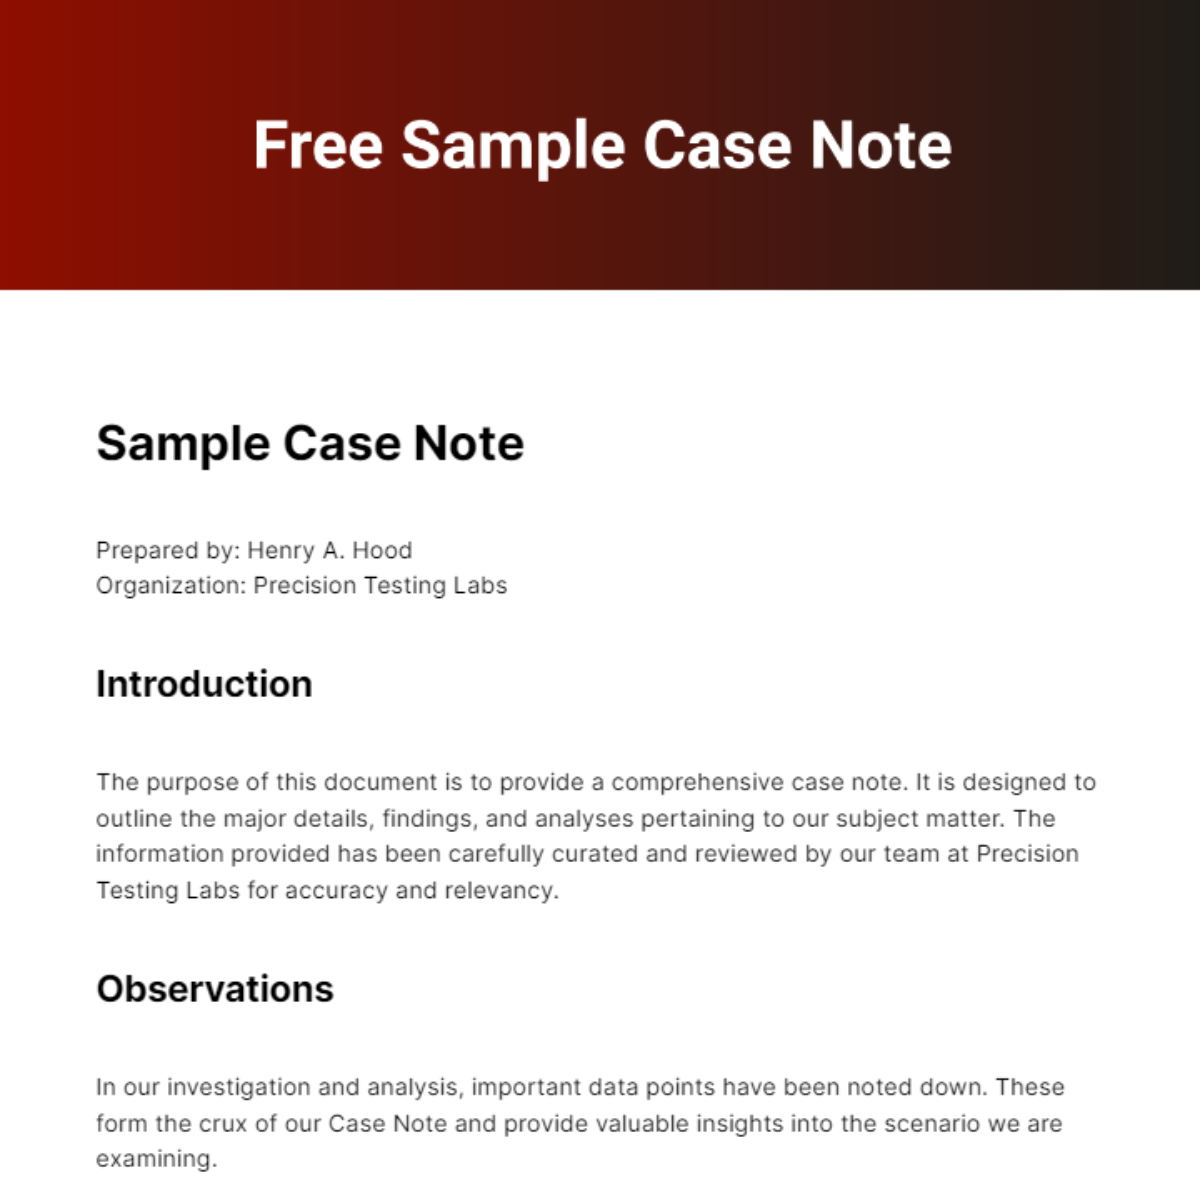 Free Sample Case Note Template